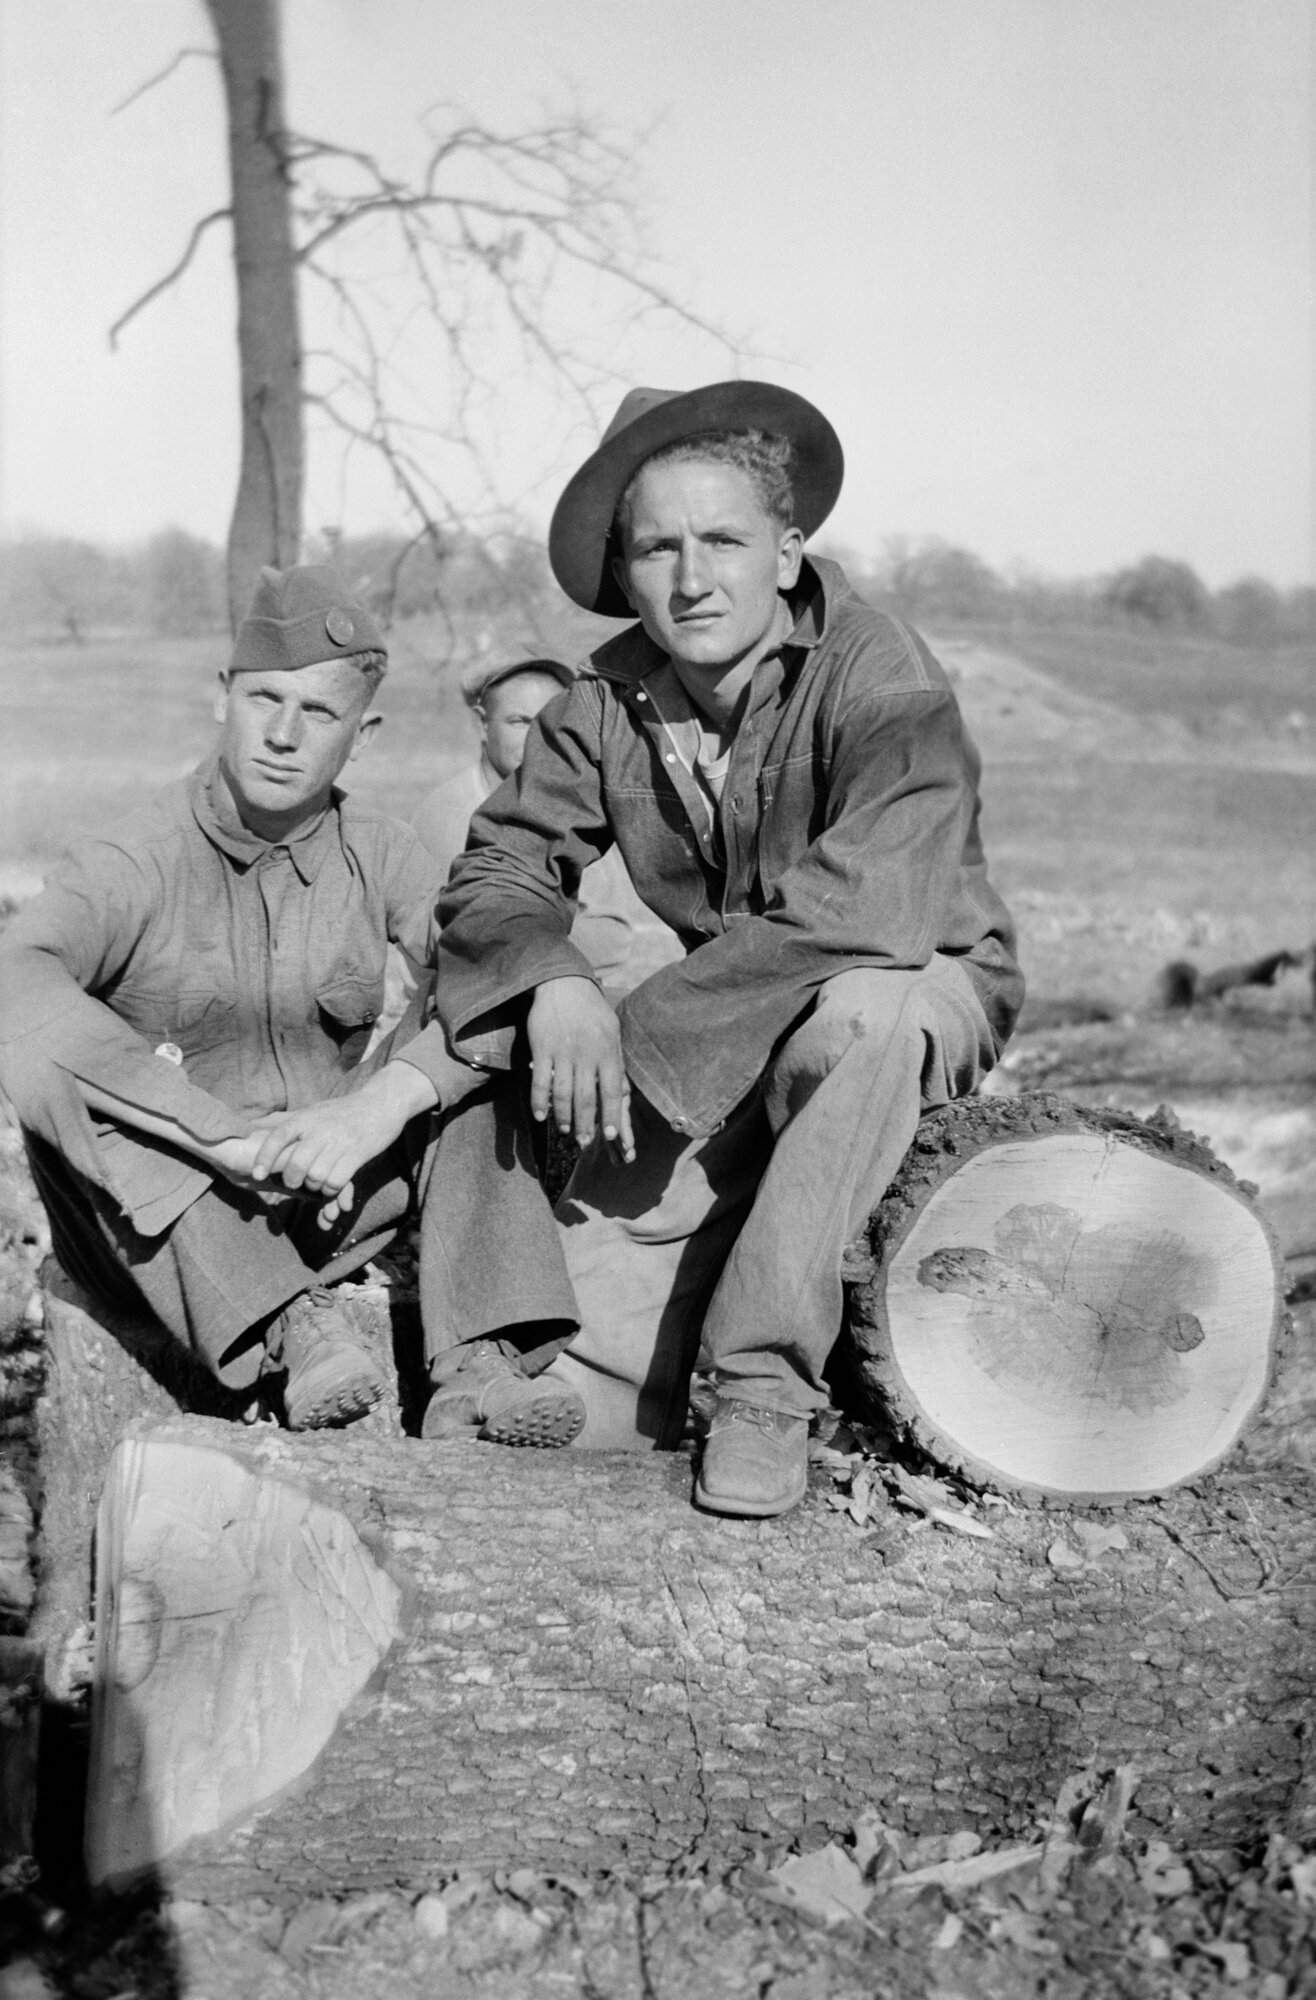  Butch Dowell,  Speedy and Butch Dowell,  1933 